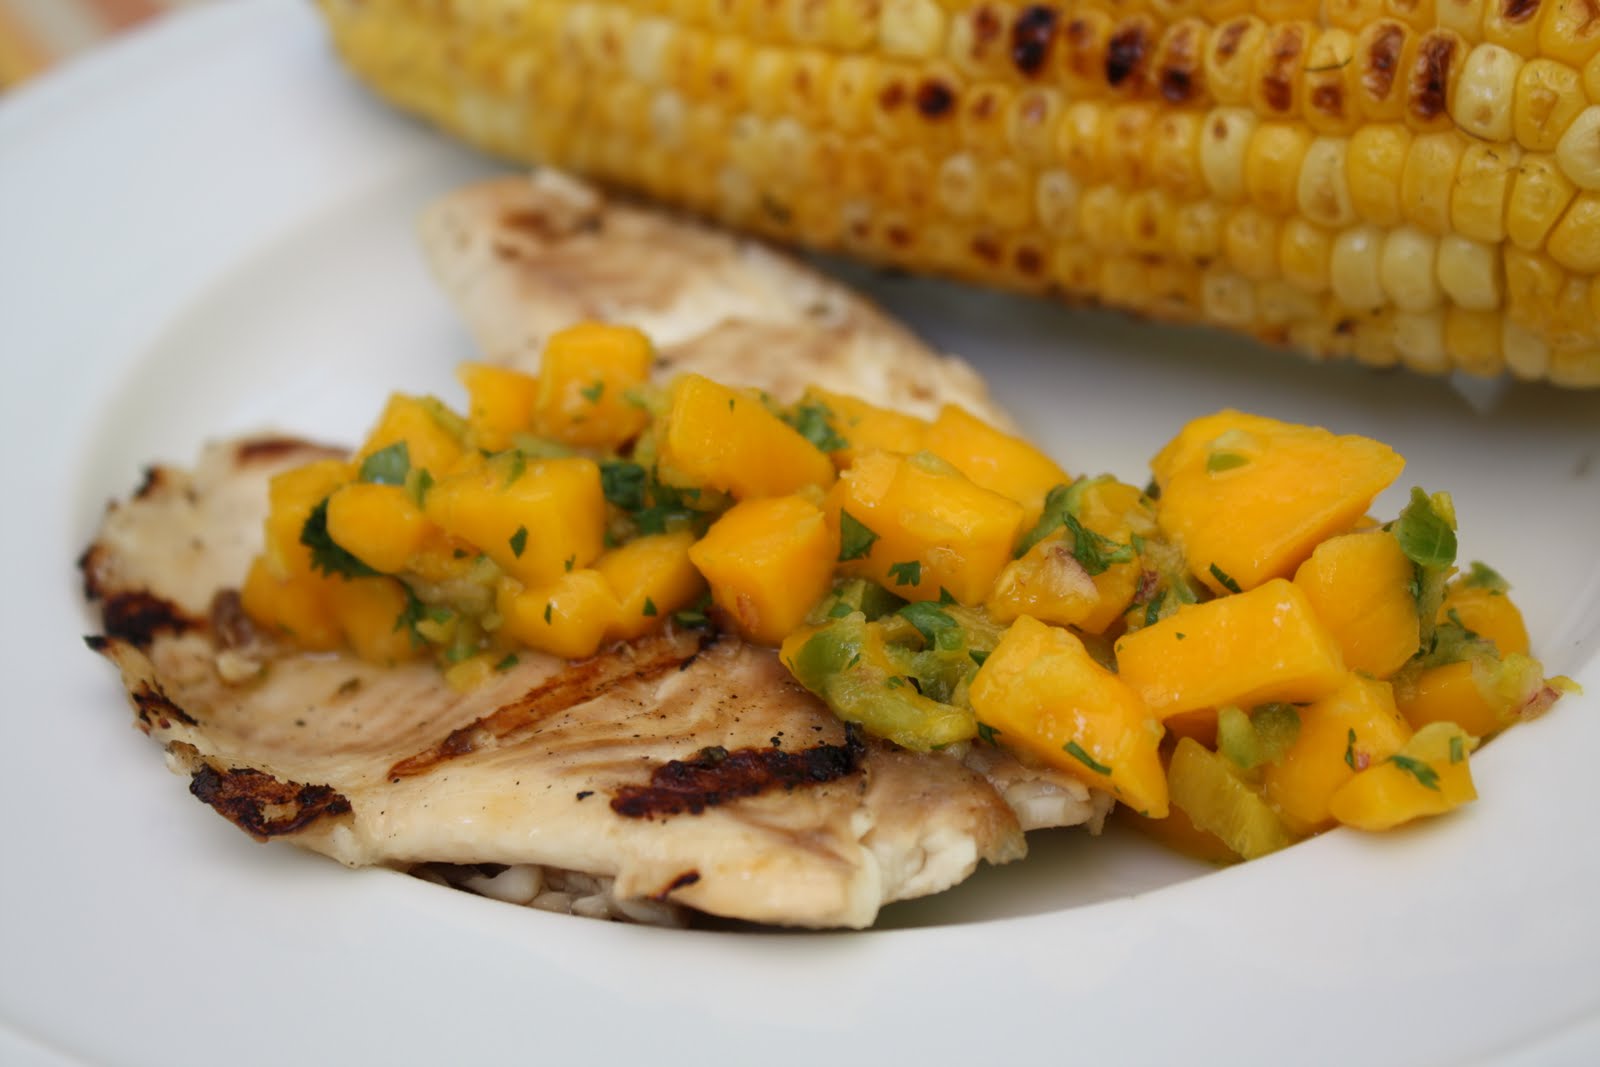 Nicole at Home: Grilled tilapia with mango salsa